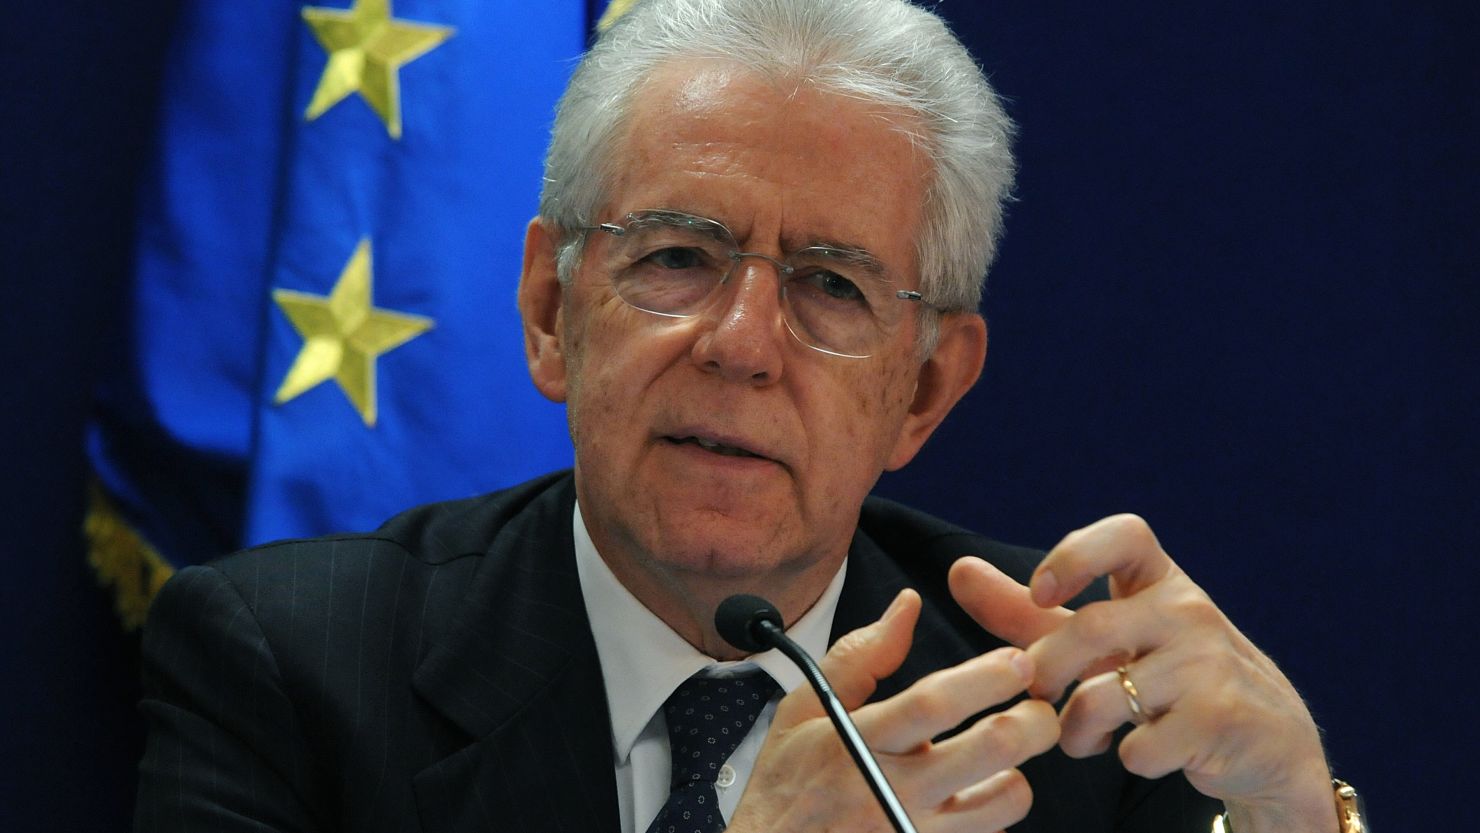 Italian Prime Minister Mario Monti has said he will stand down once next year's budget is passed.